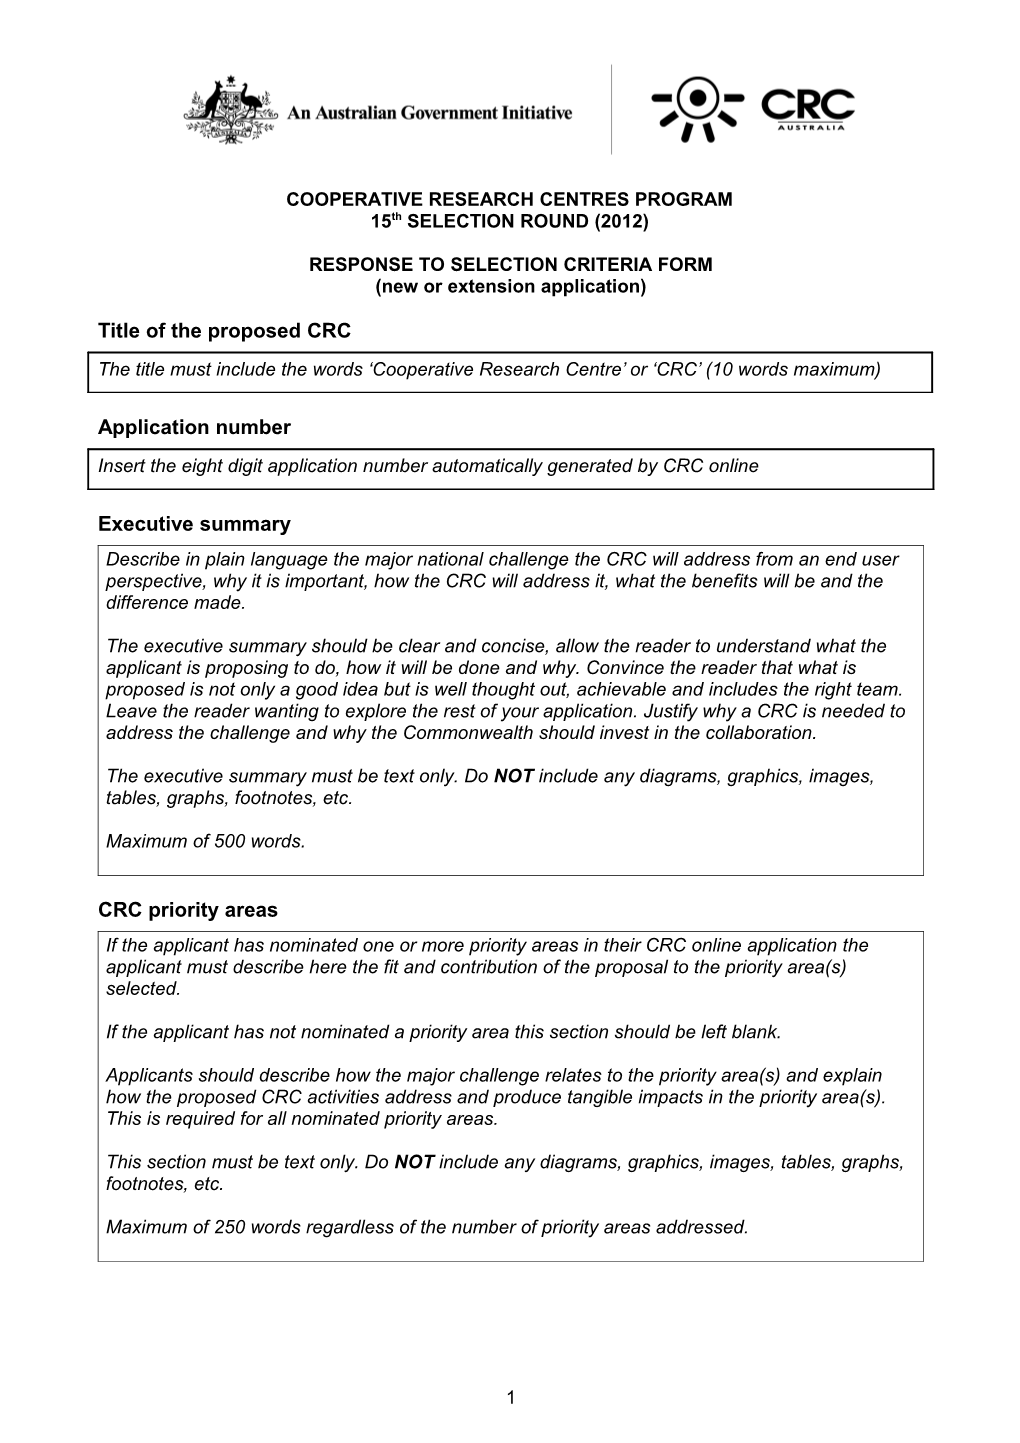 Response to Selection Criteria Form - New/Extension Application